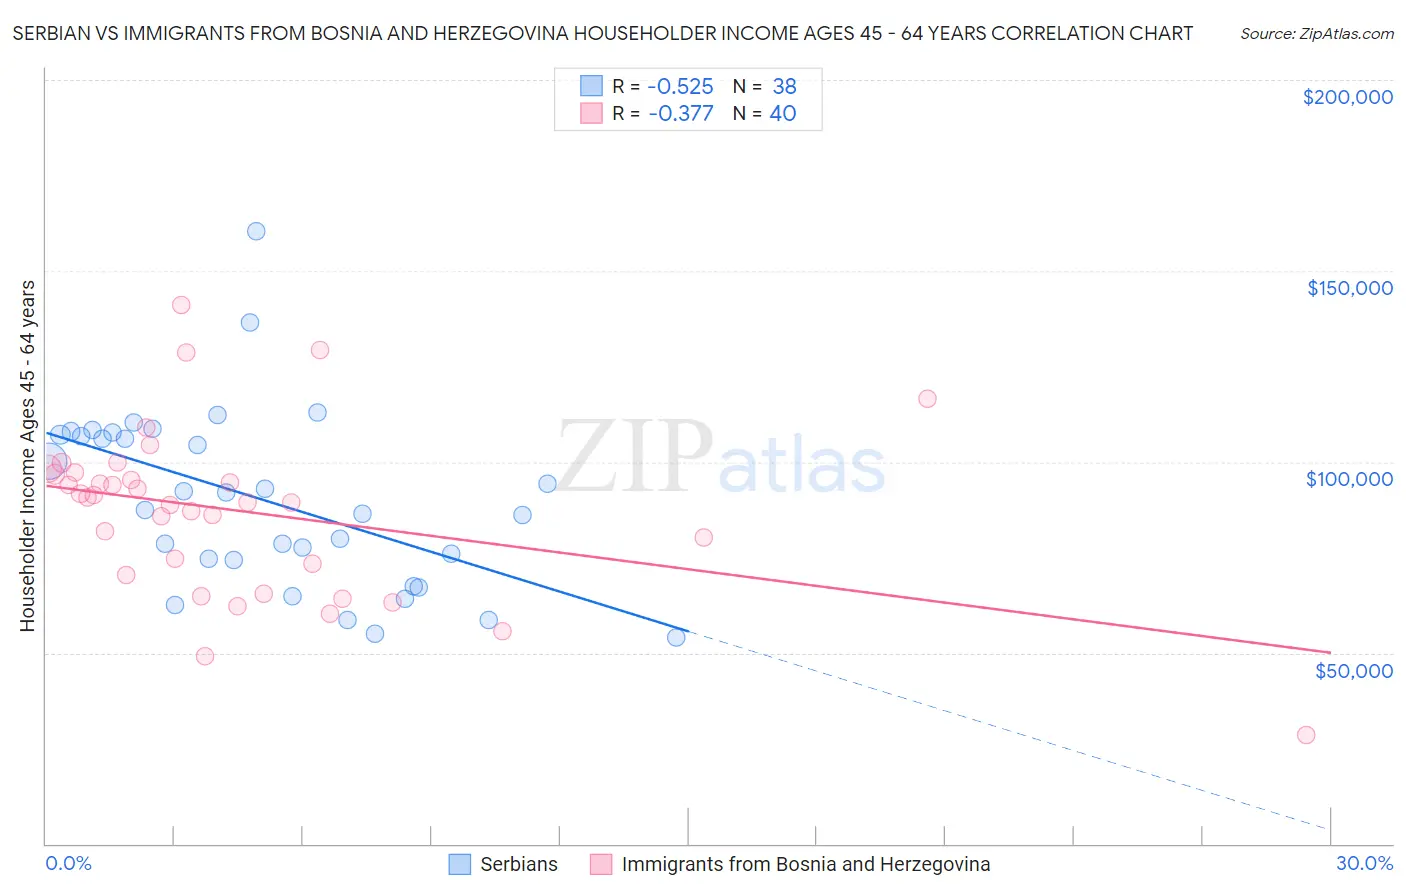 Serbian vs Immigrants from Bosnia and Herzegovina Householder Income Ages 45 - 64 years